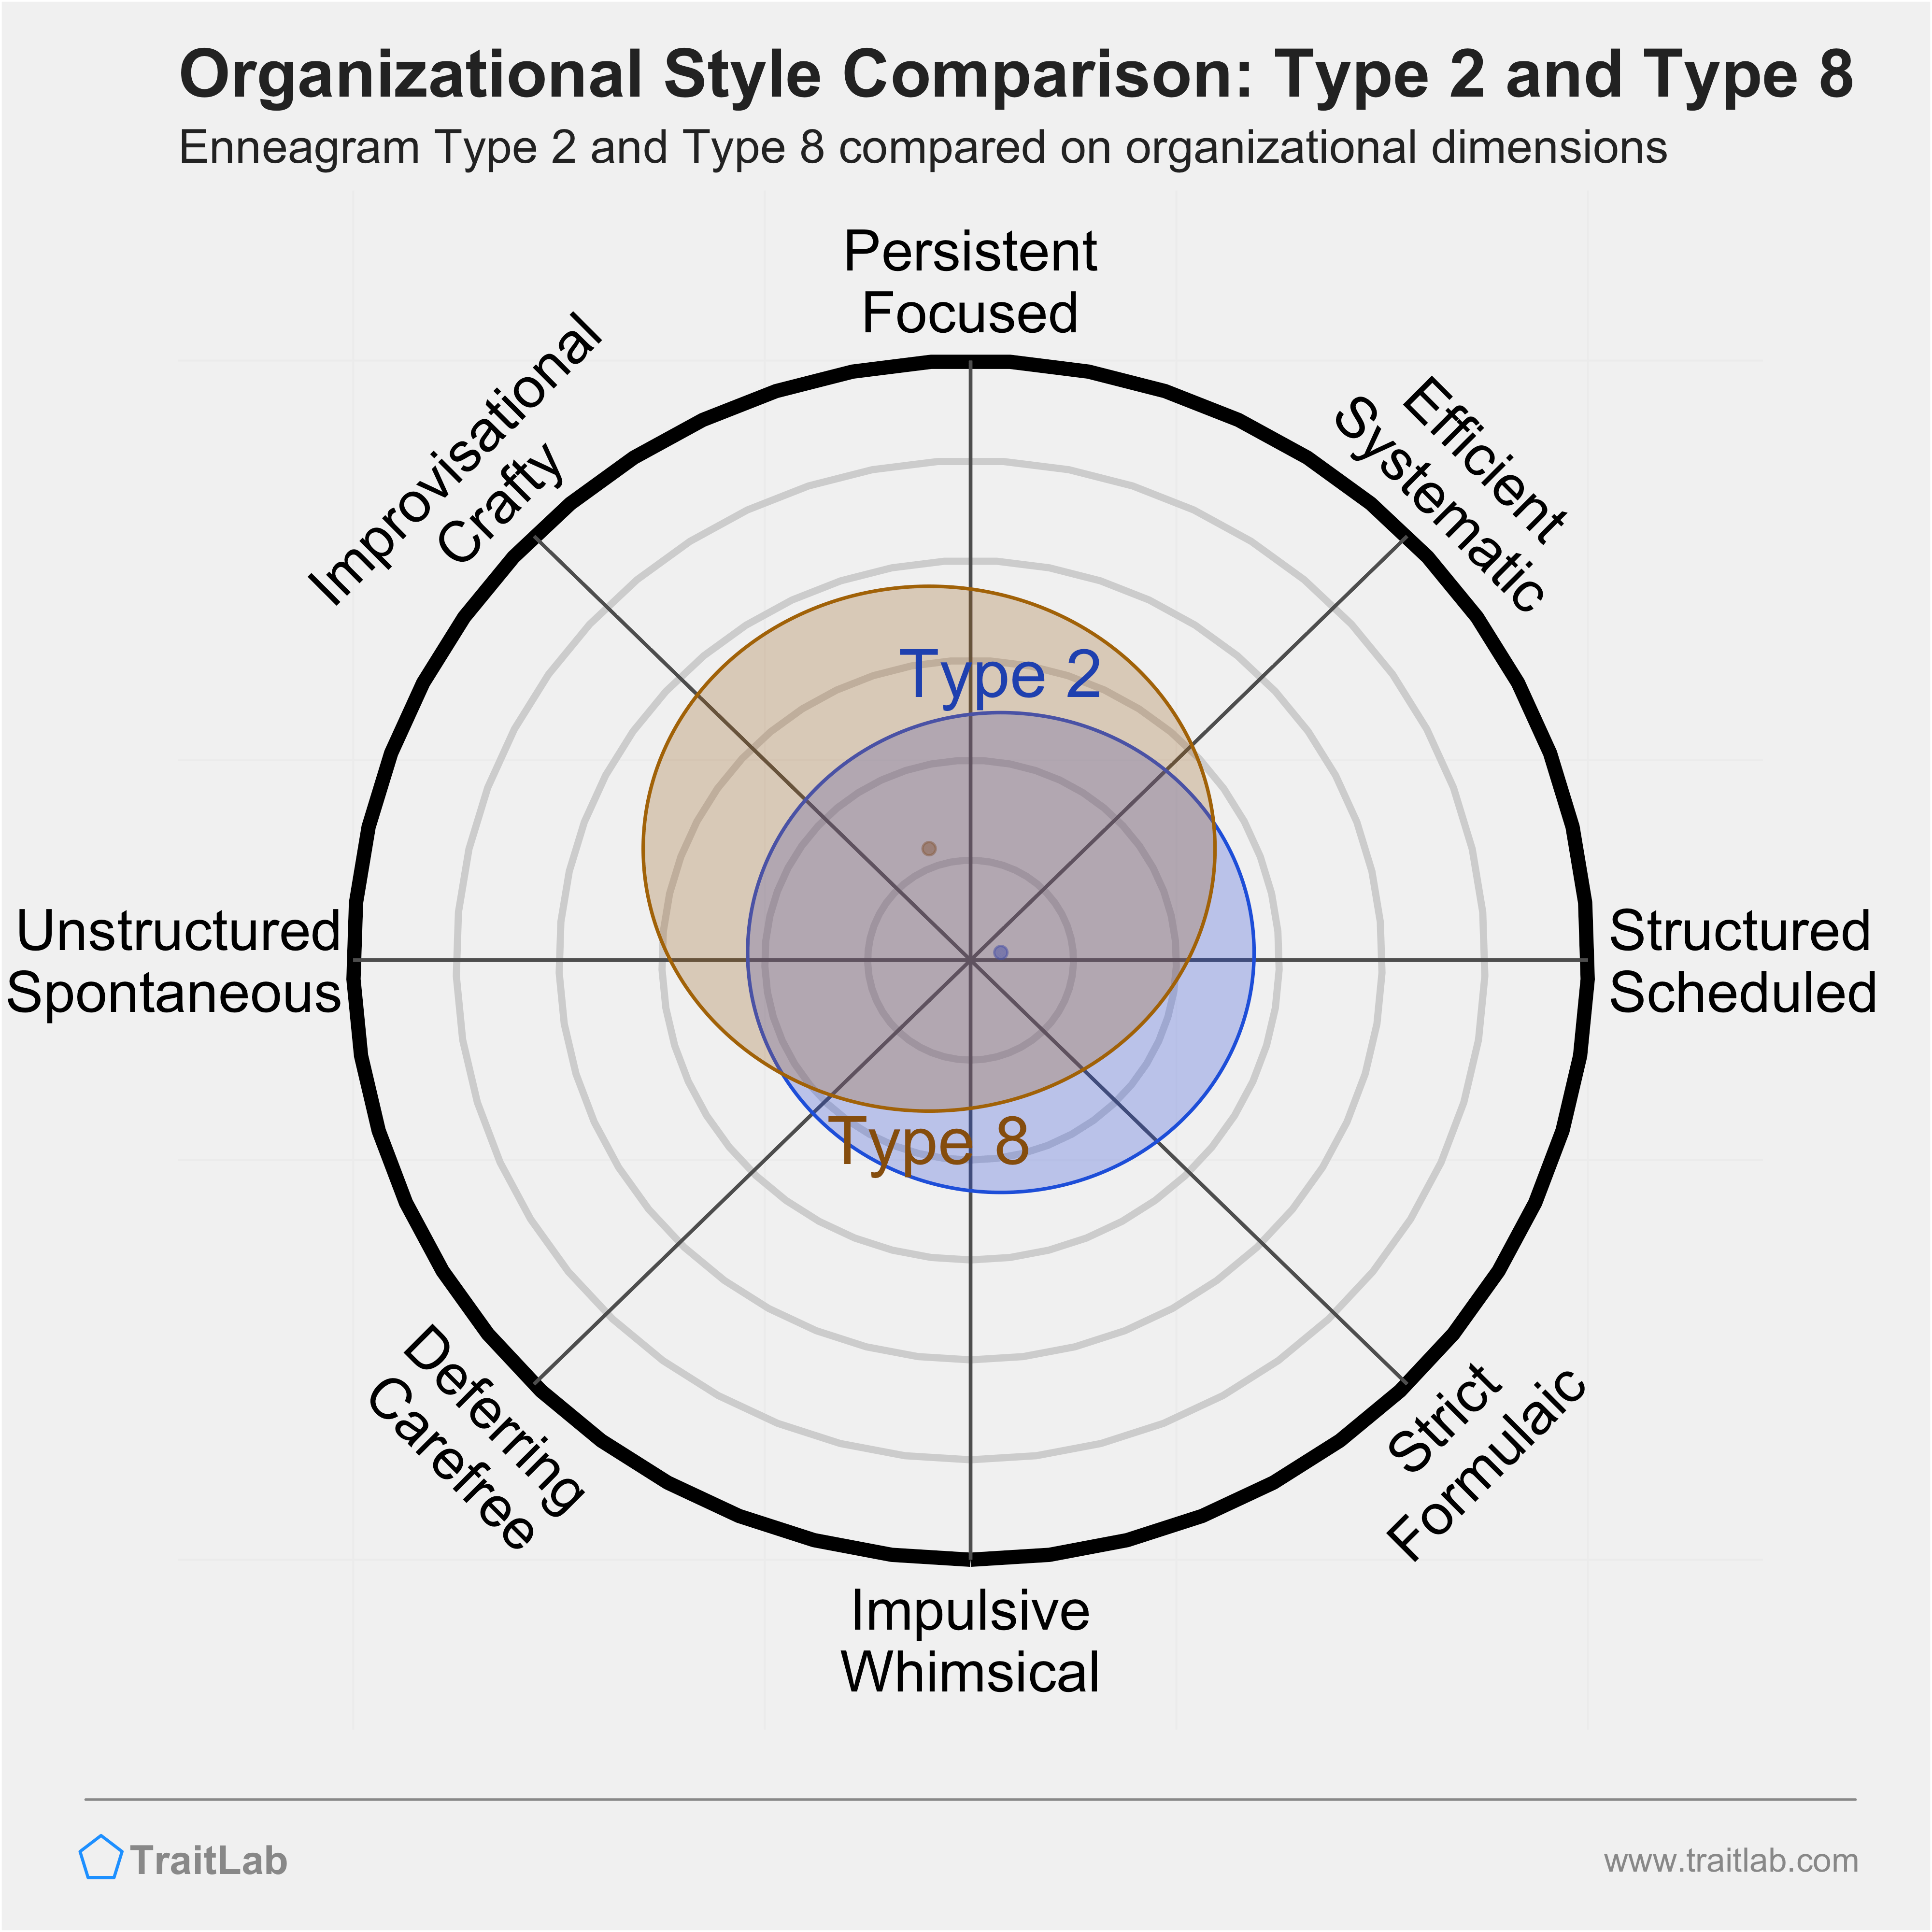 Type 2 and Type 8 comparison across organizational dimensions